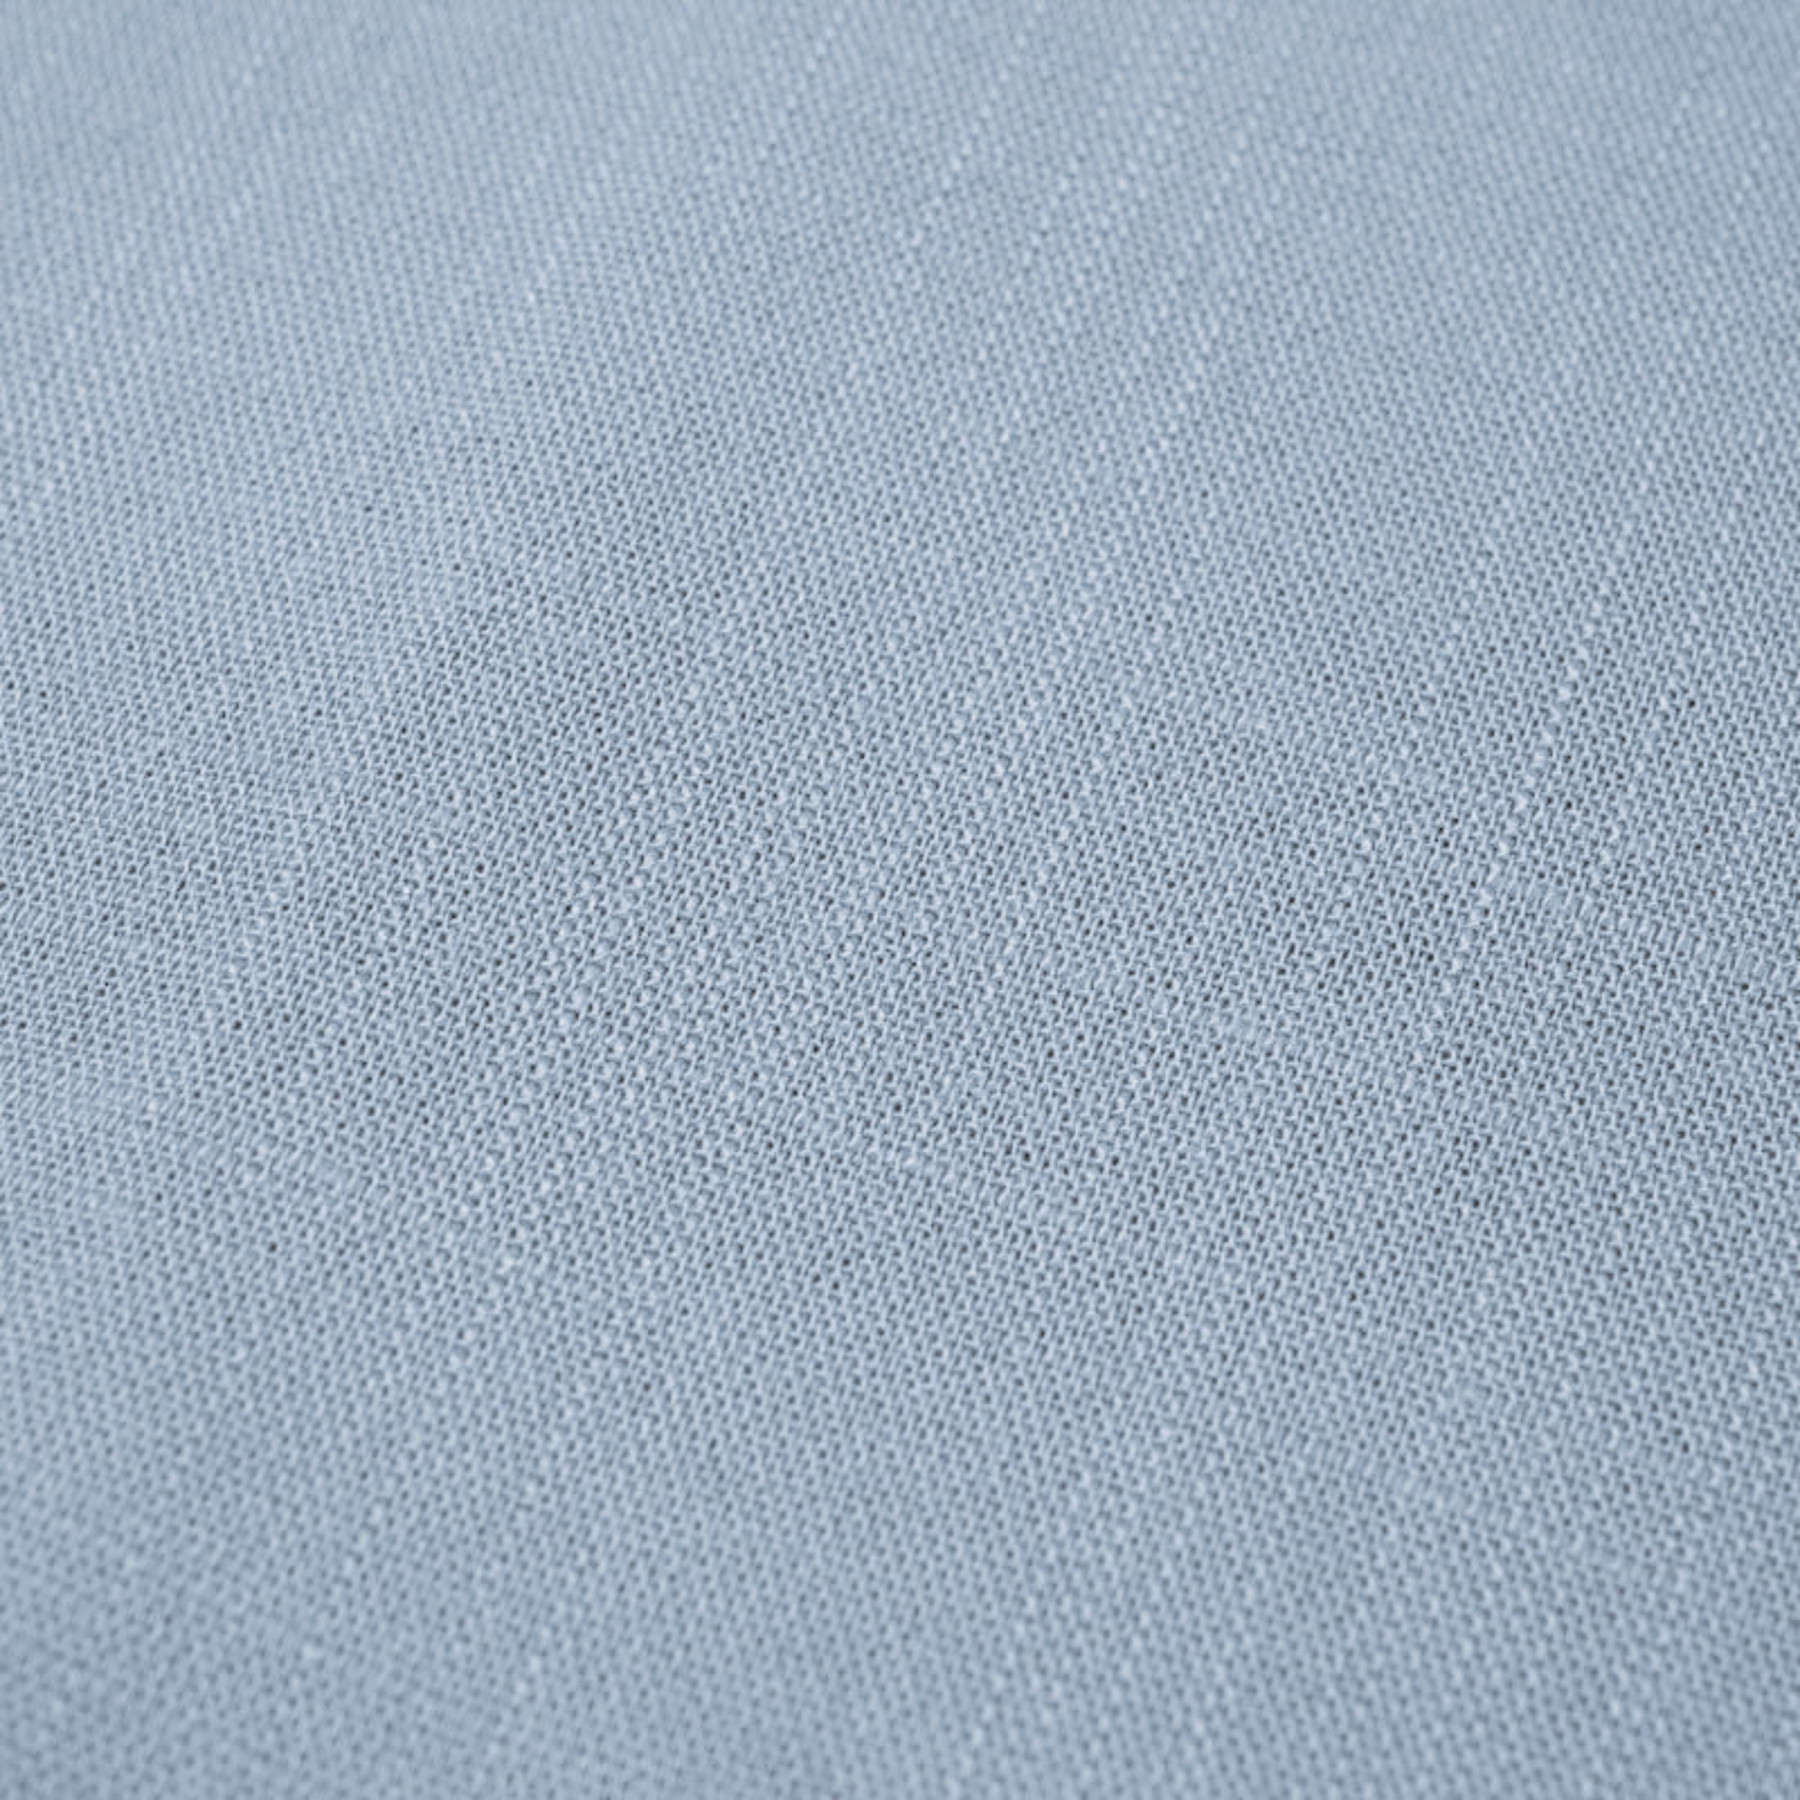 Muted blue - Linen with viscose